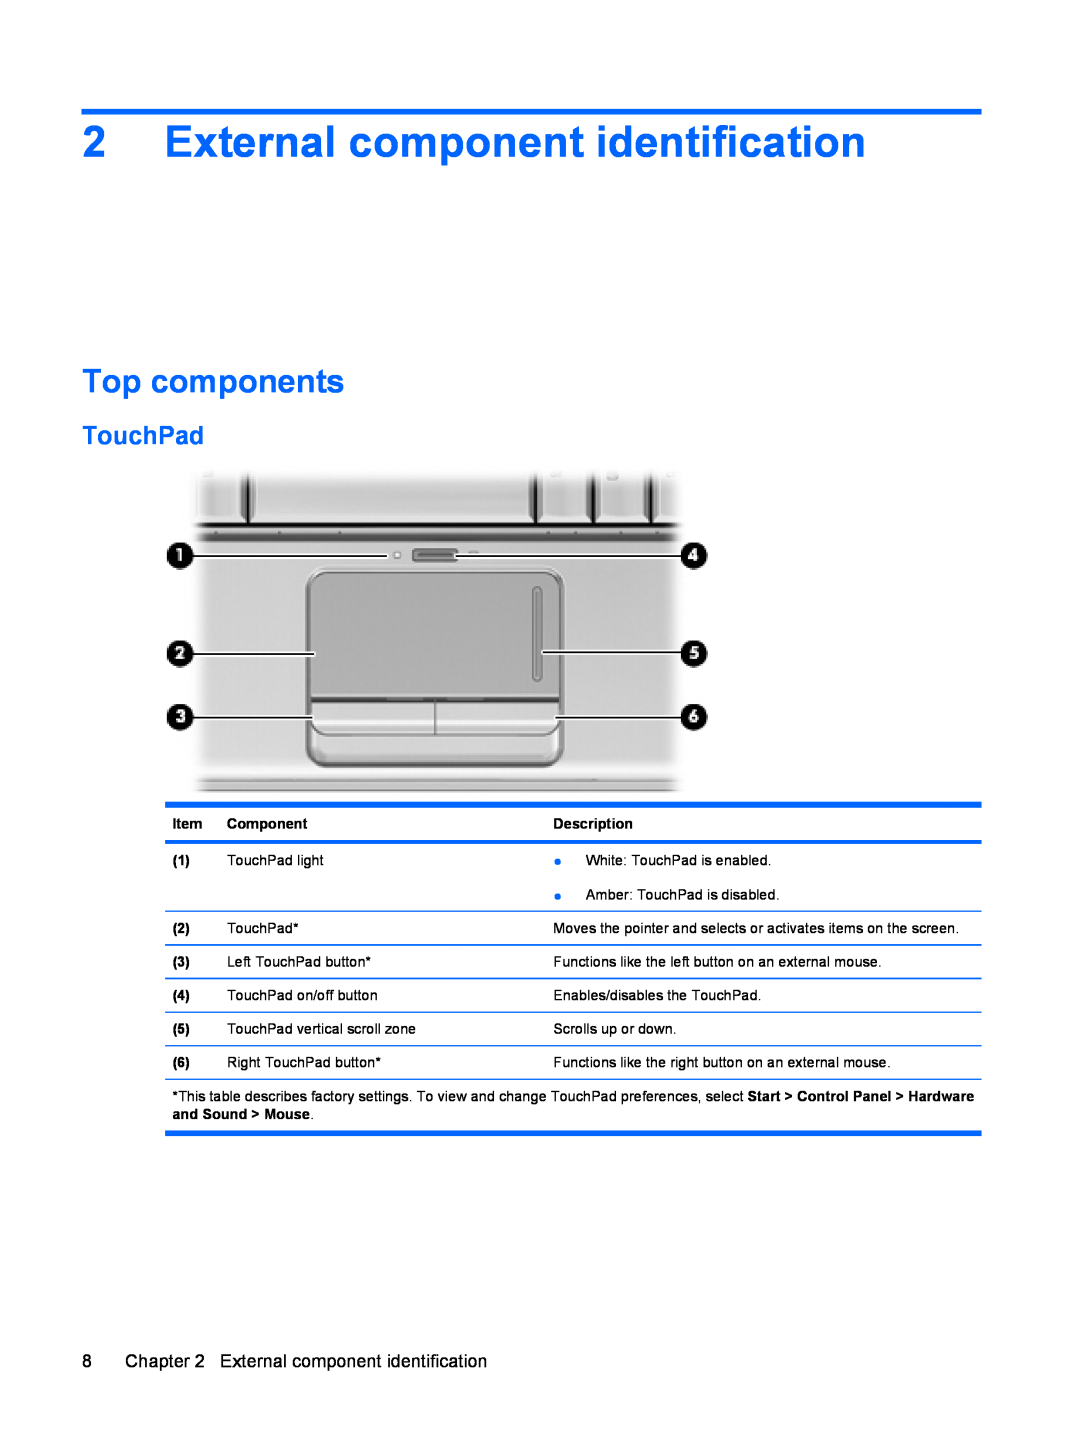 HP DV6 manual External component identification, Top components, TouchPad 